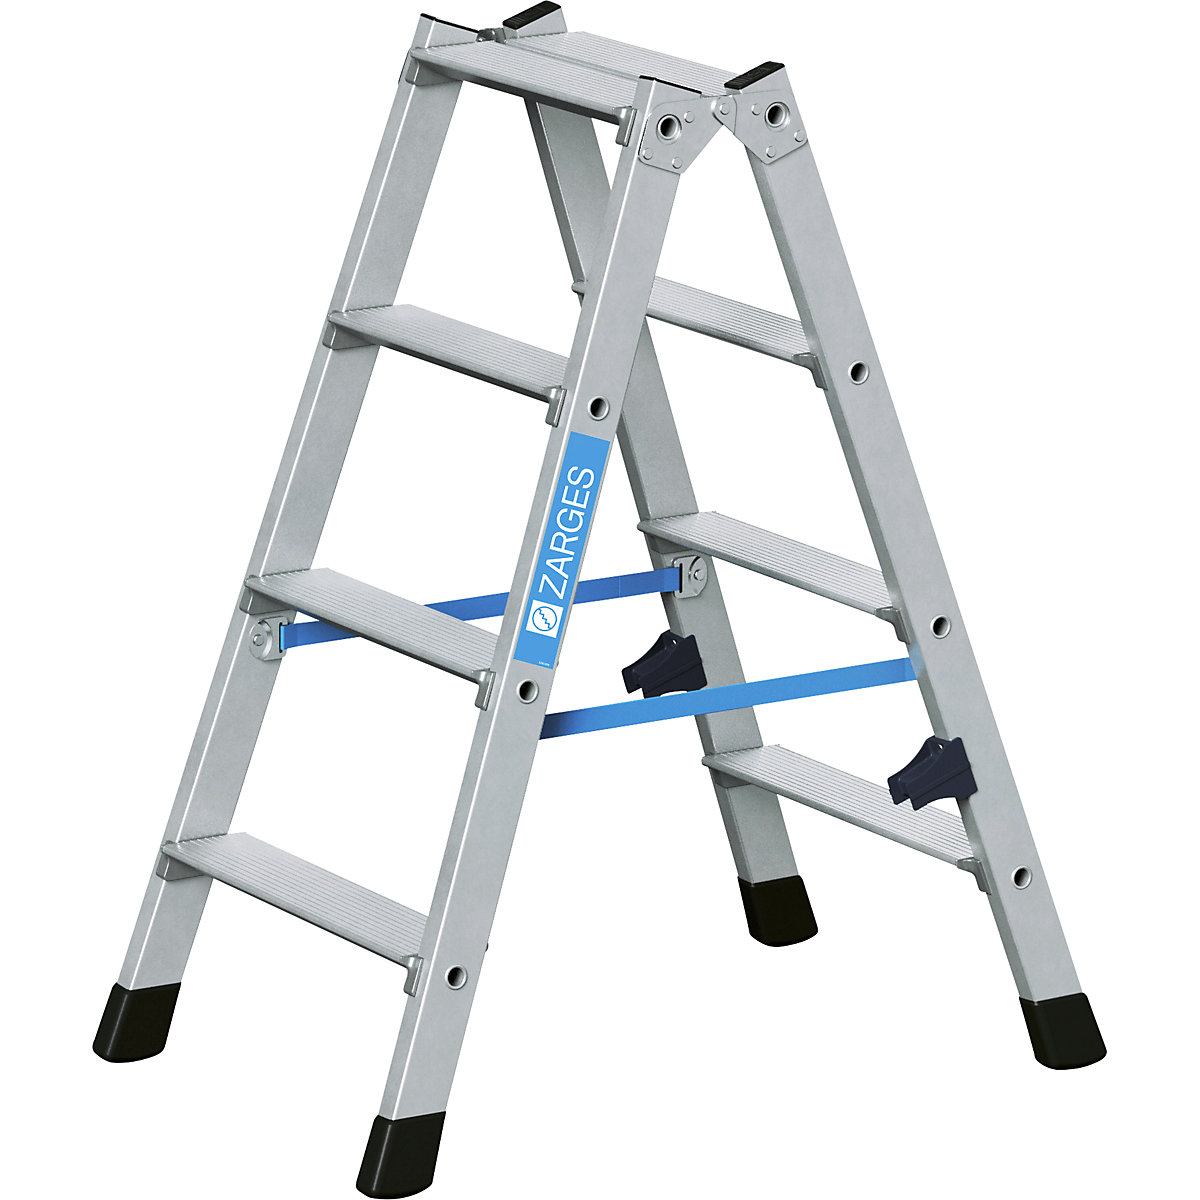 Aluminium step ladder, double sided access – ZARGES